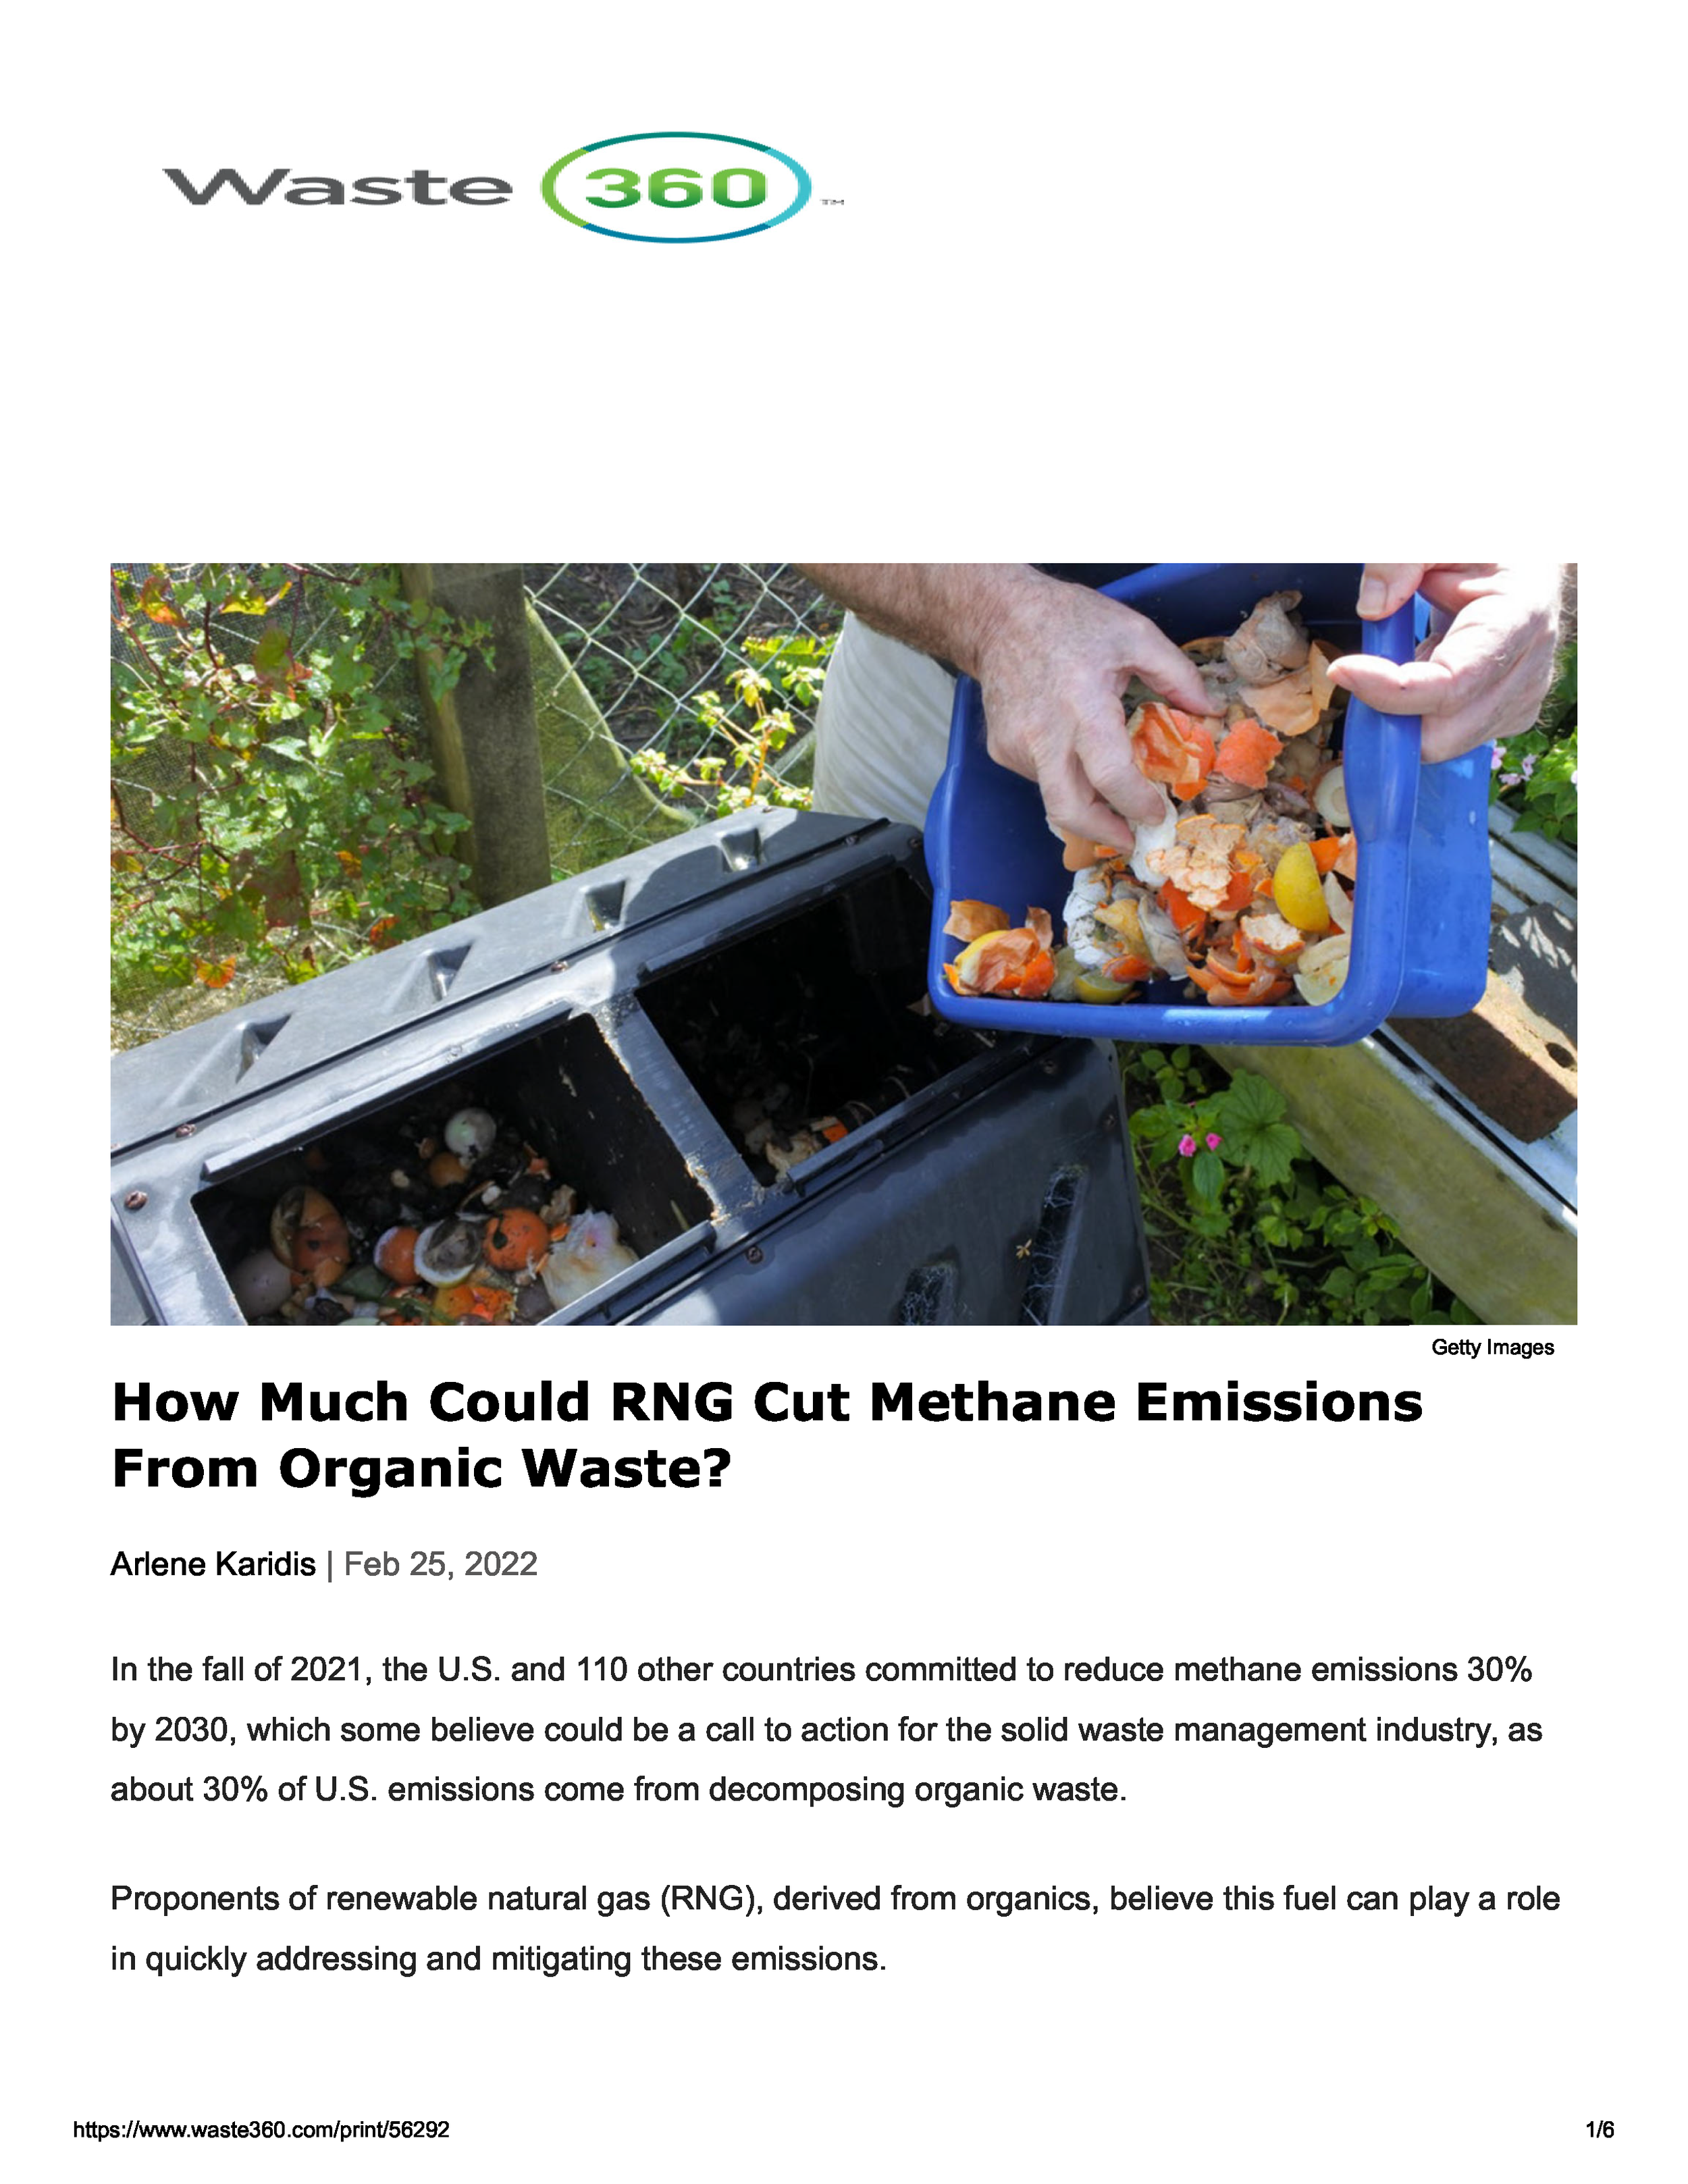 How Much Could RNG Cut Methane Emissions From Organic Waste_Waste 360 02252022_Page_1.png